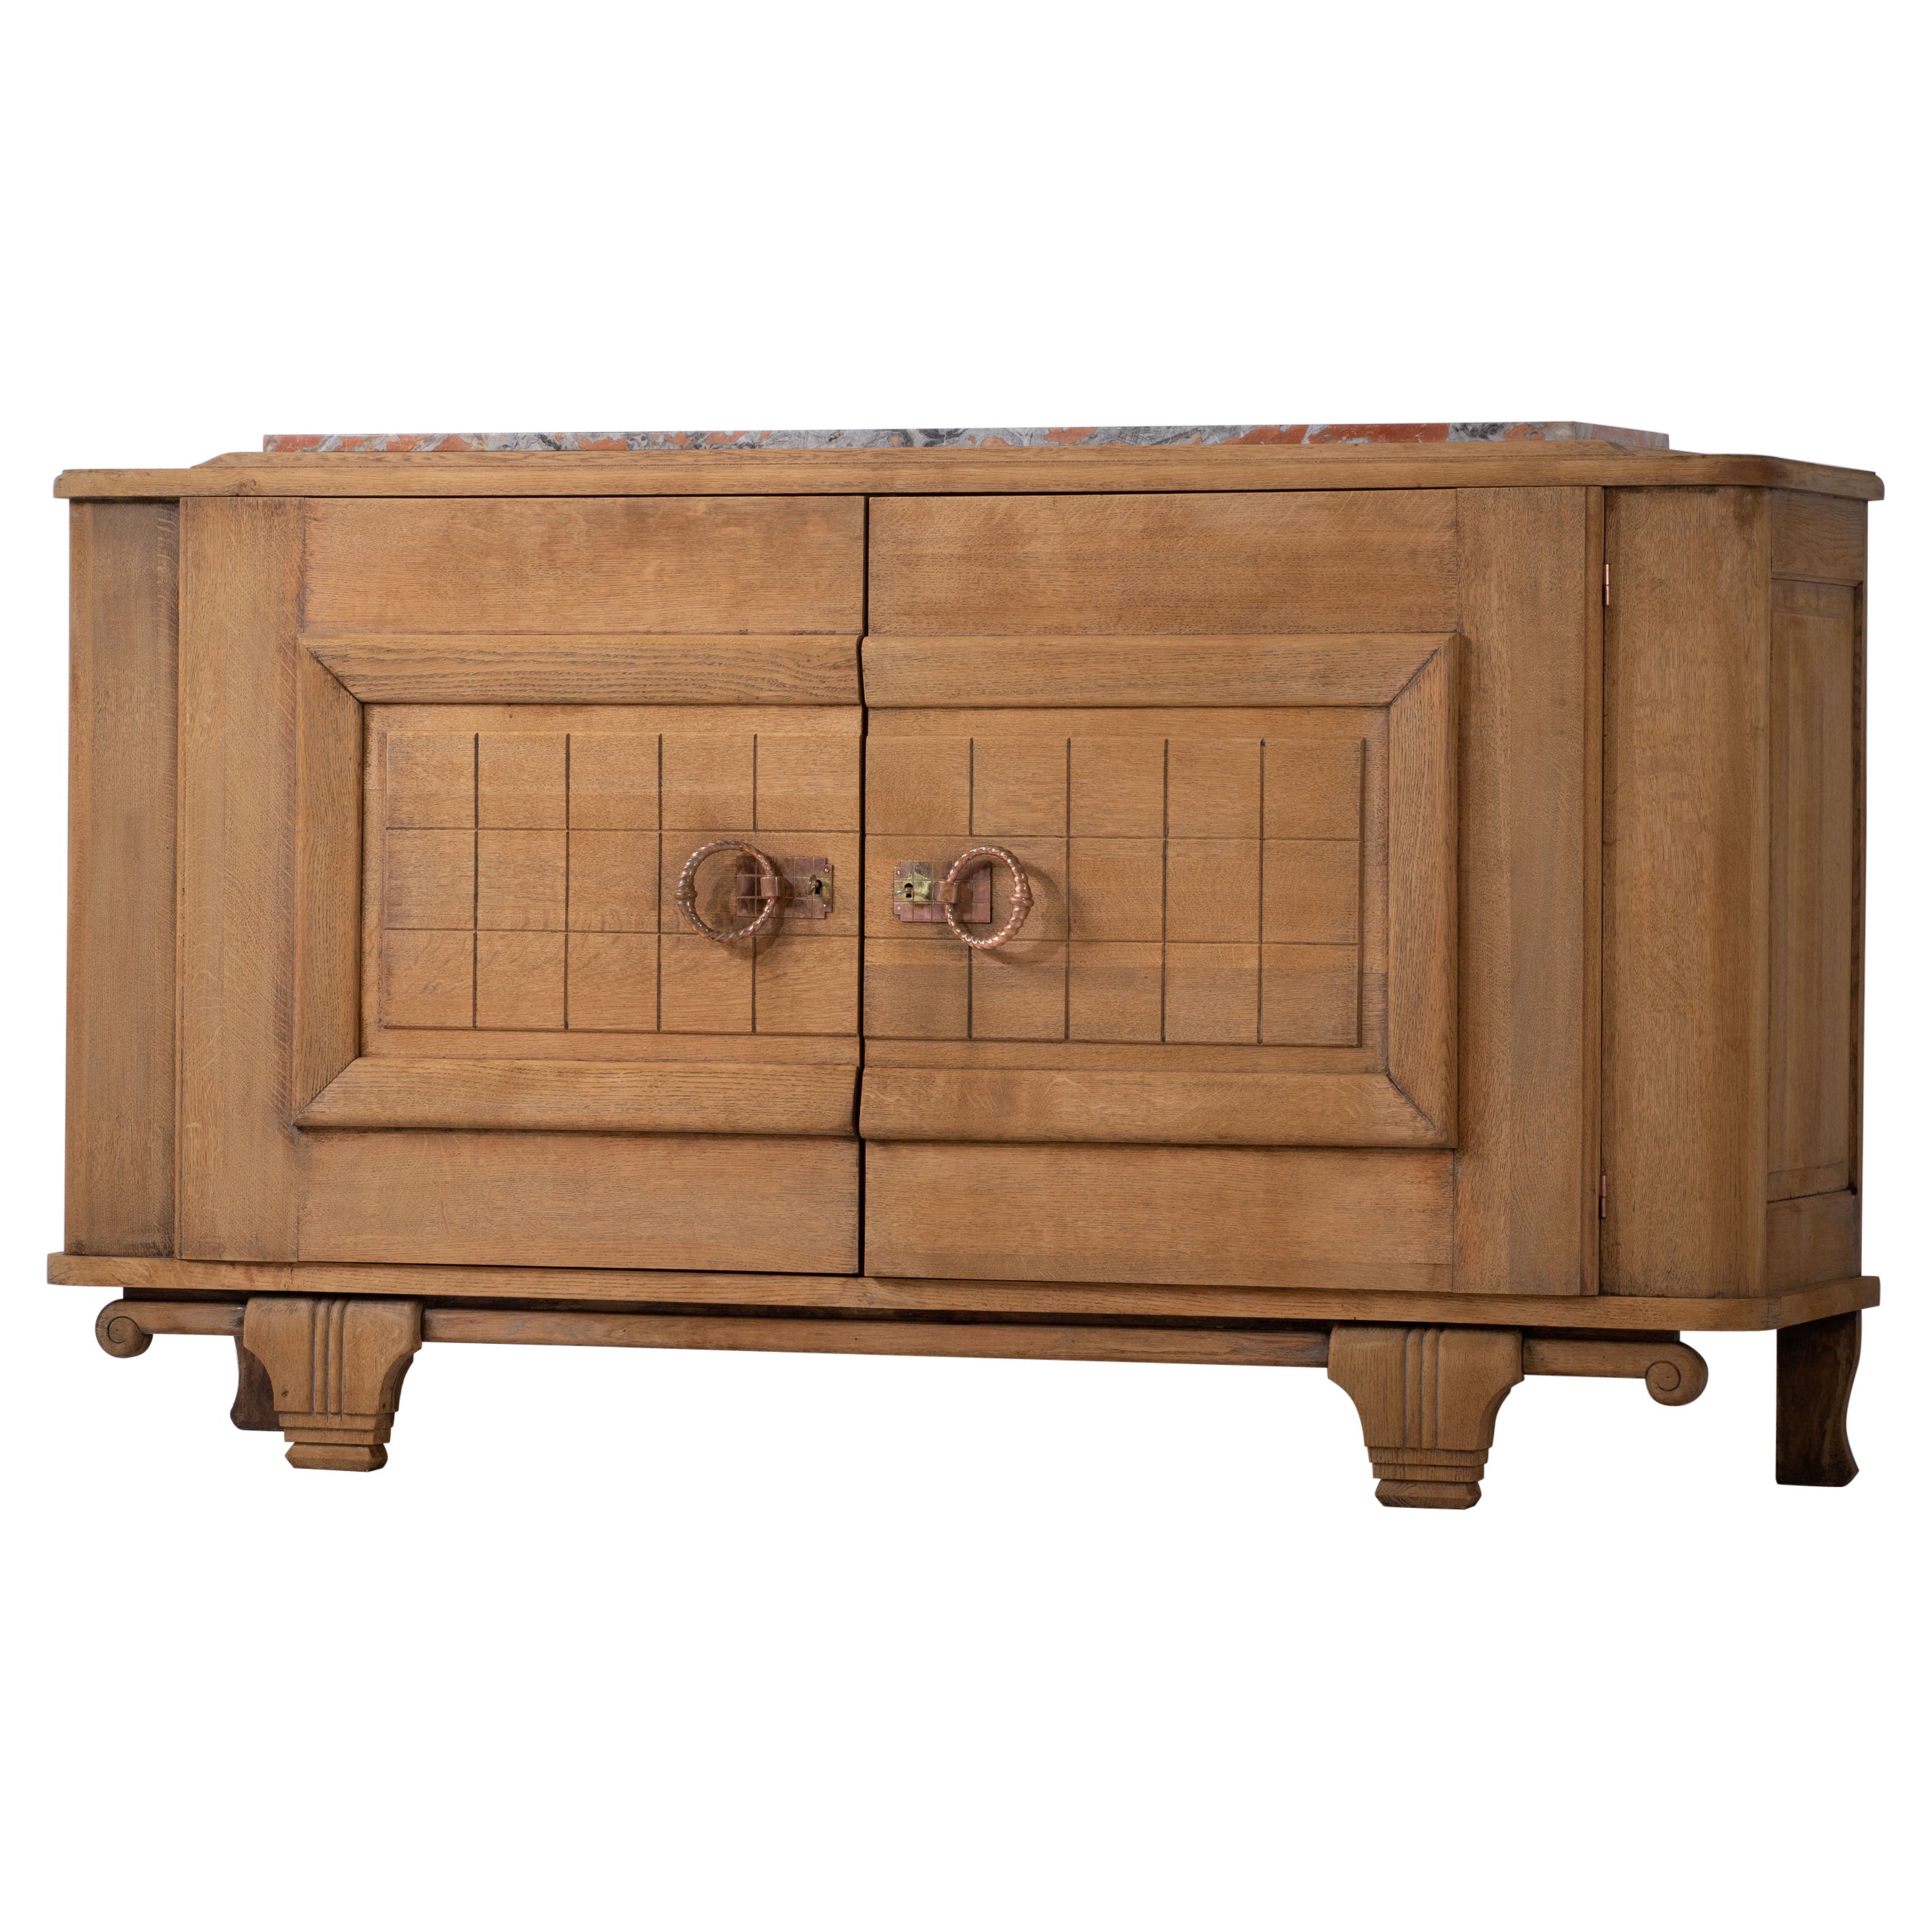 French Raw Oak Art Deco Sideboard, France, 1930s For Sale